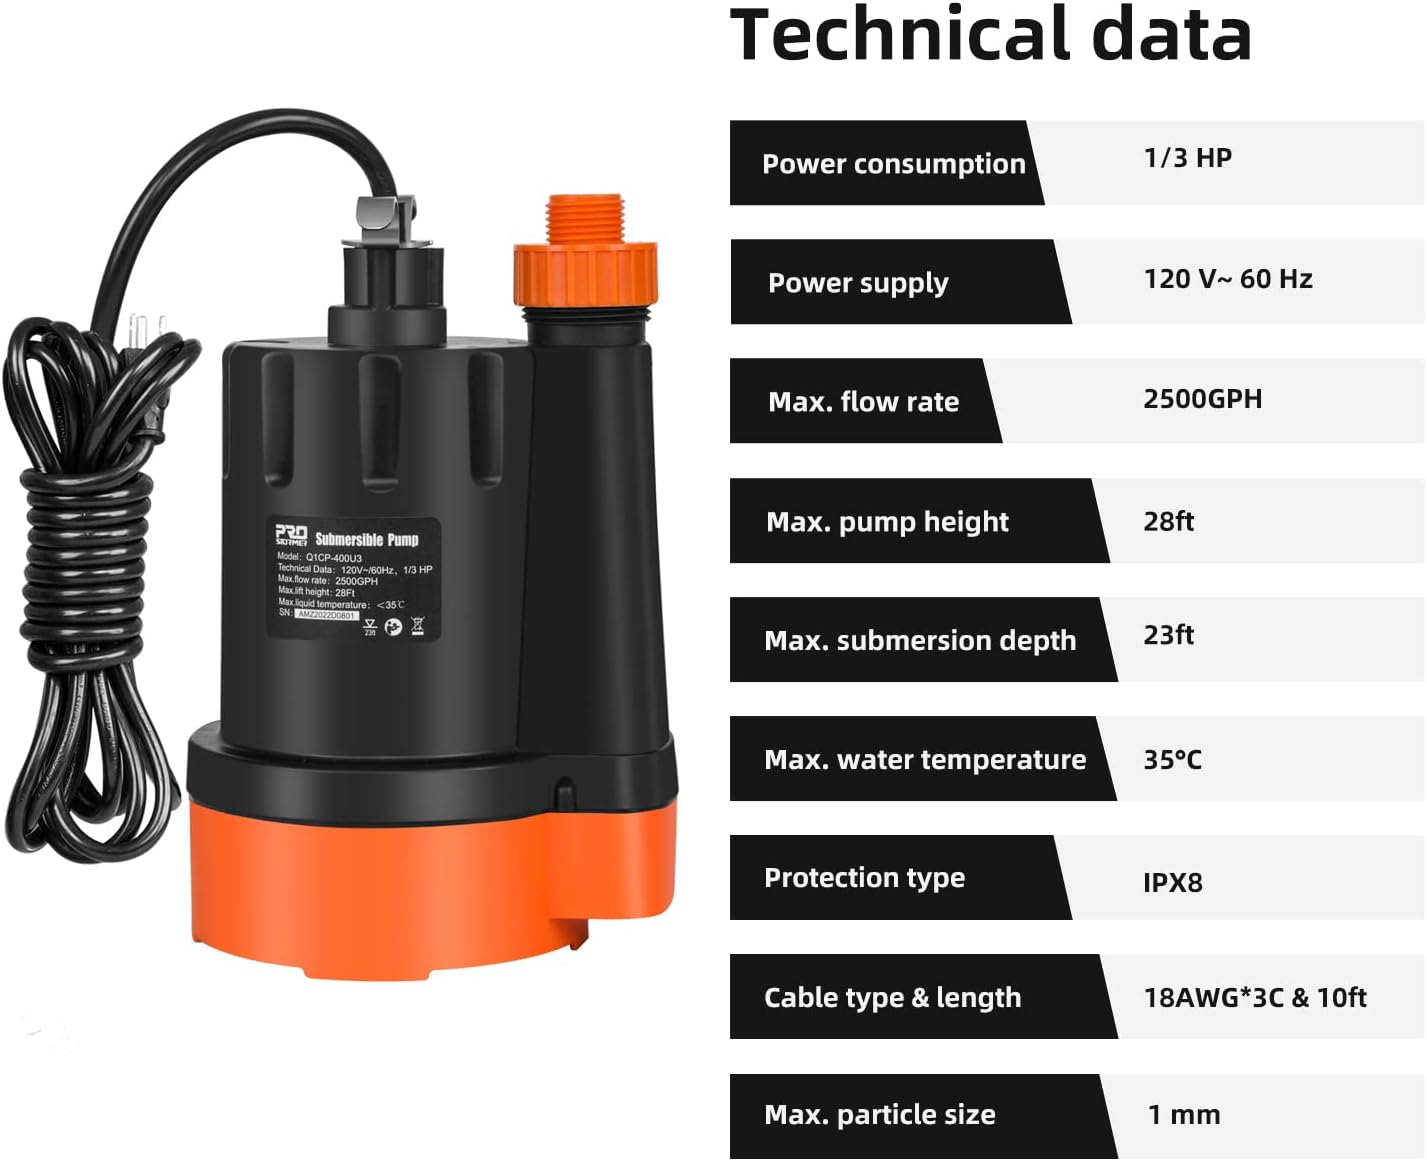 Prostormer Submersible Water Pump, 1/3HP 2500GPH Utility Pump Portable Electric Clean Water Drainage Pump for Pool Draining, Flooding, Swi